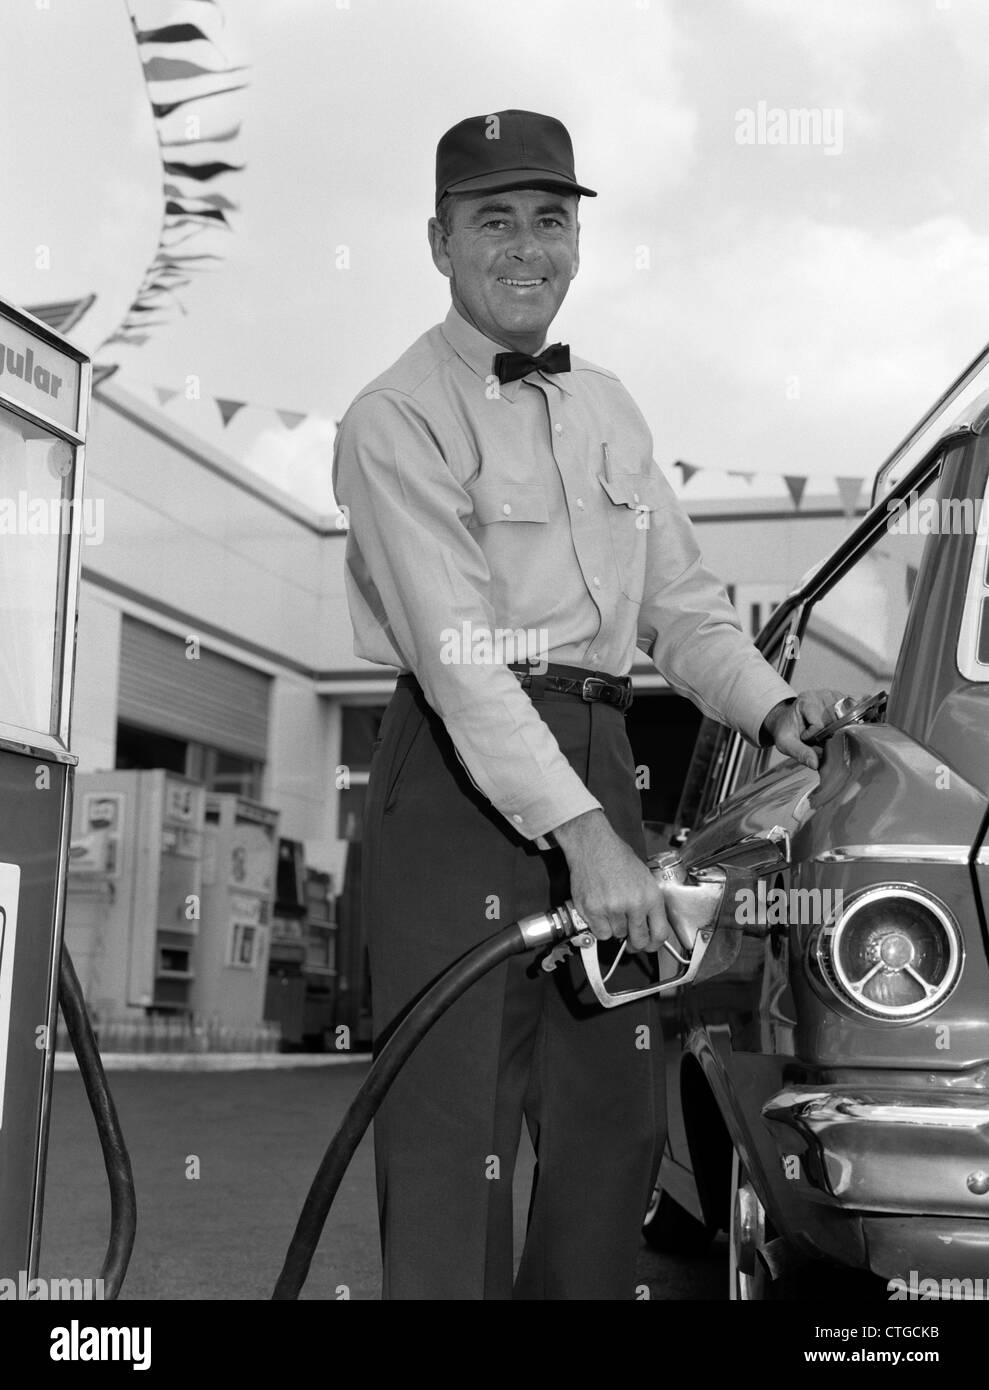 1960s MALE SERVICE STATION ATTENDANT WEARING CAP AND BOW TIE SMILING WHILE PUMPING GASOLINE OUTSIDE Stock Photo